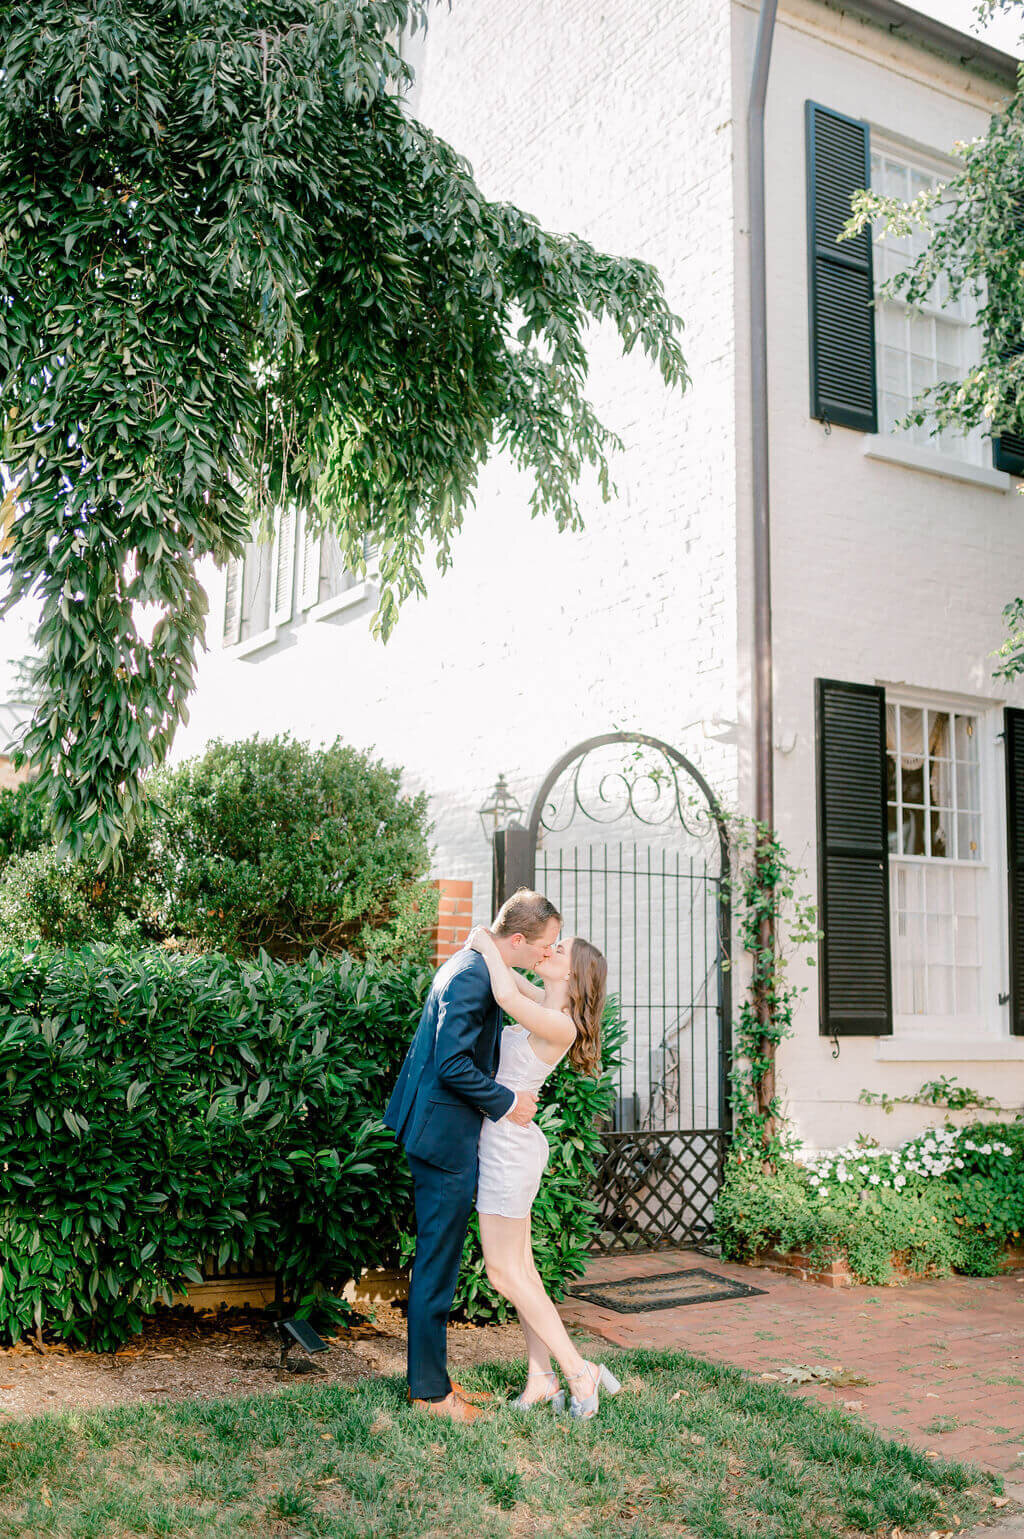 Romantic image of a couple kissing in front of a white home in old town Alexandriafor their engagement photos.